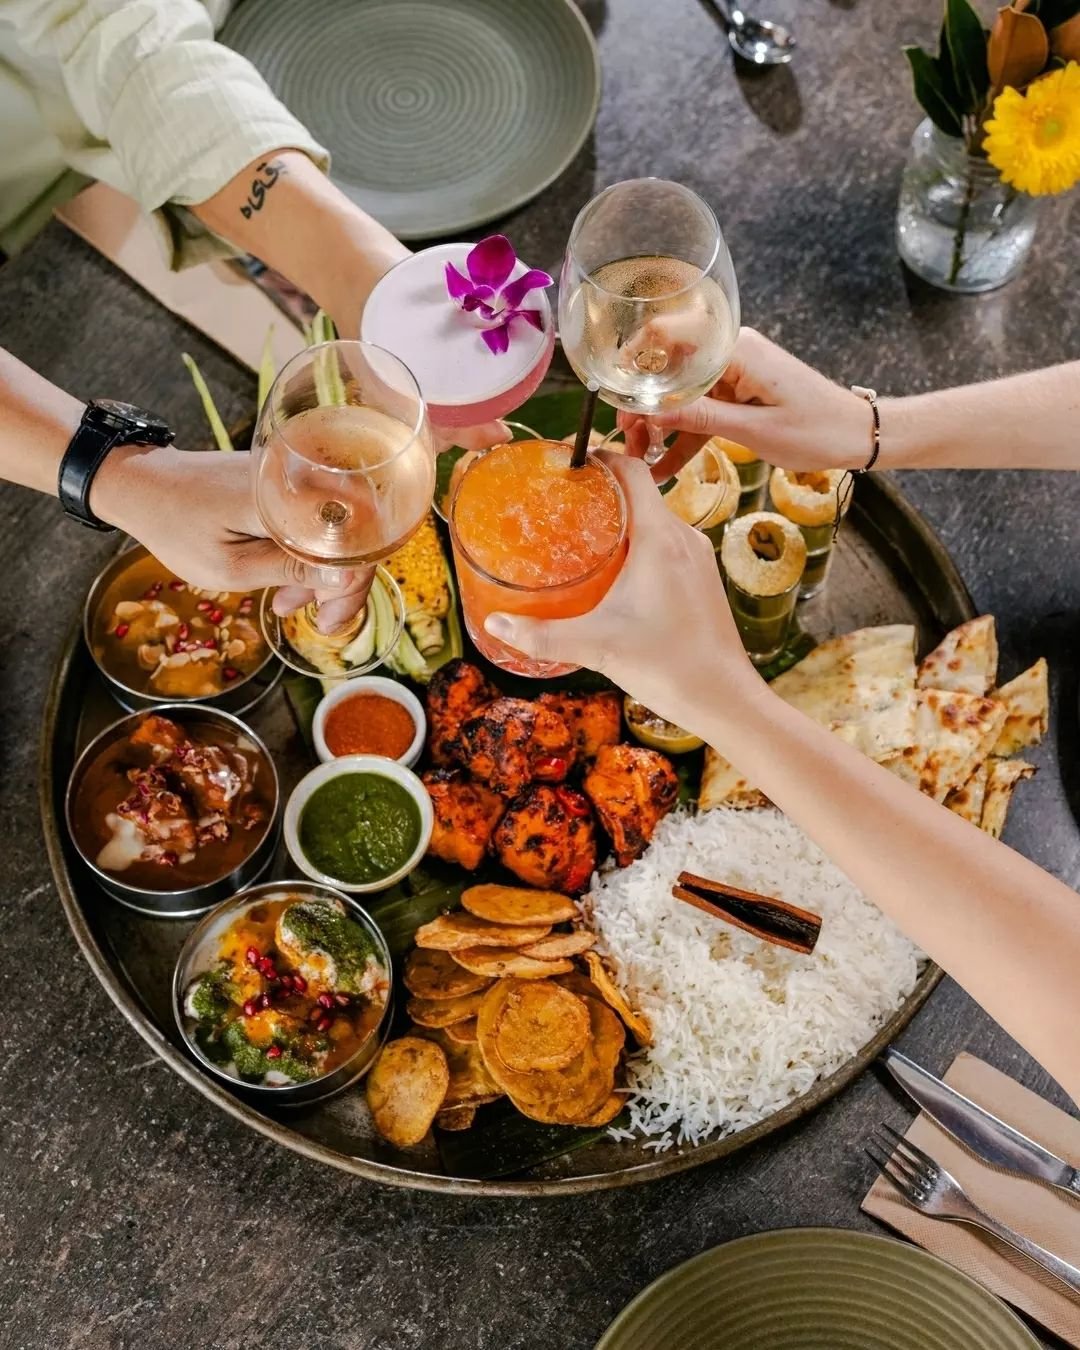 It's the last weekend of Jumbo Thali!&nbsp;🇮🇳

Join us for lunch this weekend as we take you on a trip to Old Delhi!

Our Jumbo Thali is an exciting way to share mouth-watering dishes like tandoor roasted chicken tikka, chilli &amp; lime corn cobs,